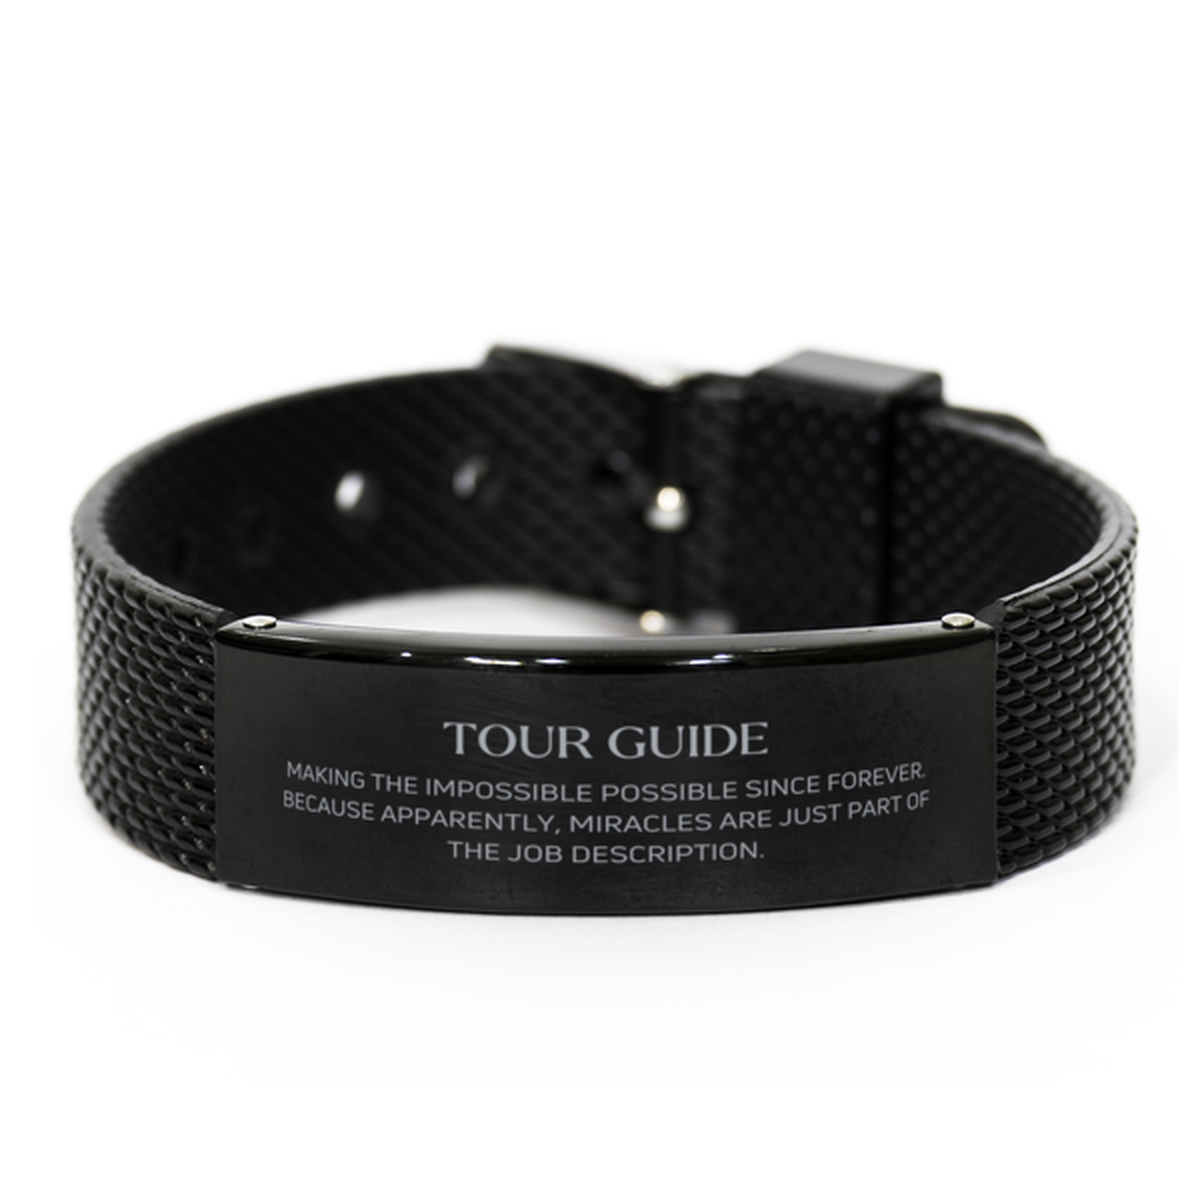 Funny Tour Guide Gifts, Miracles are just part of the job description, Inspirational Birthday Black Shark Mesh Bracelet For Tour Guide, Men, Women, Coworkers, Friends, Boss